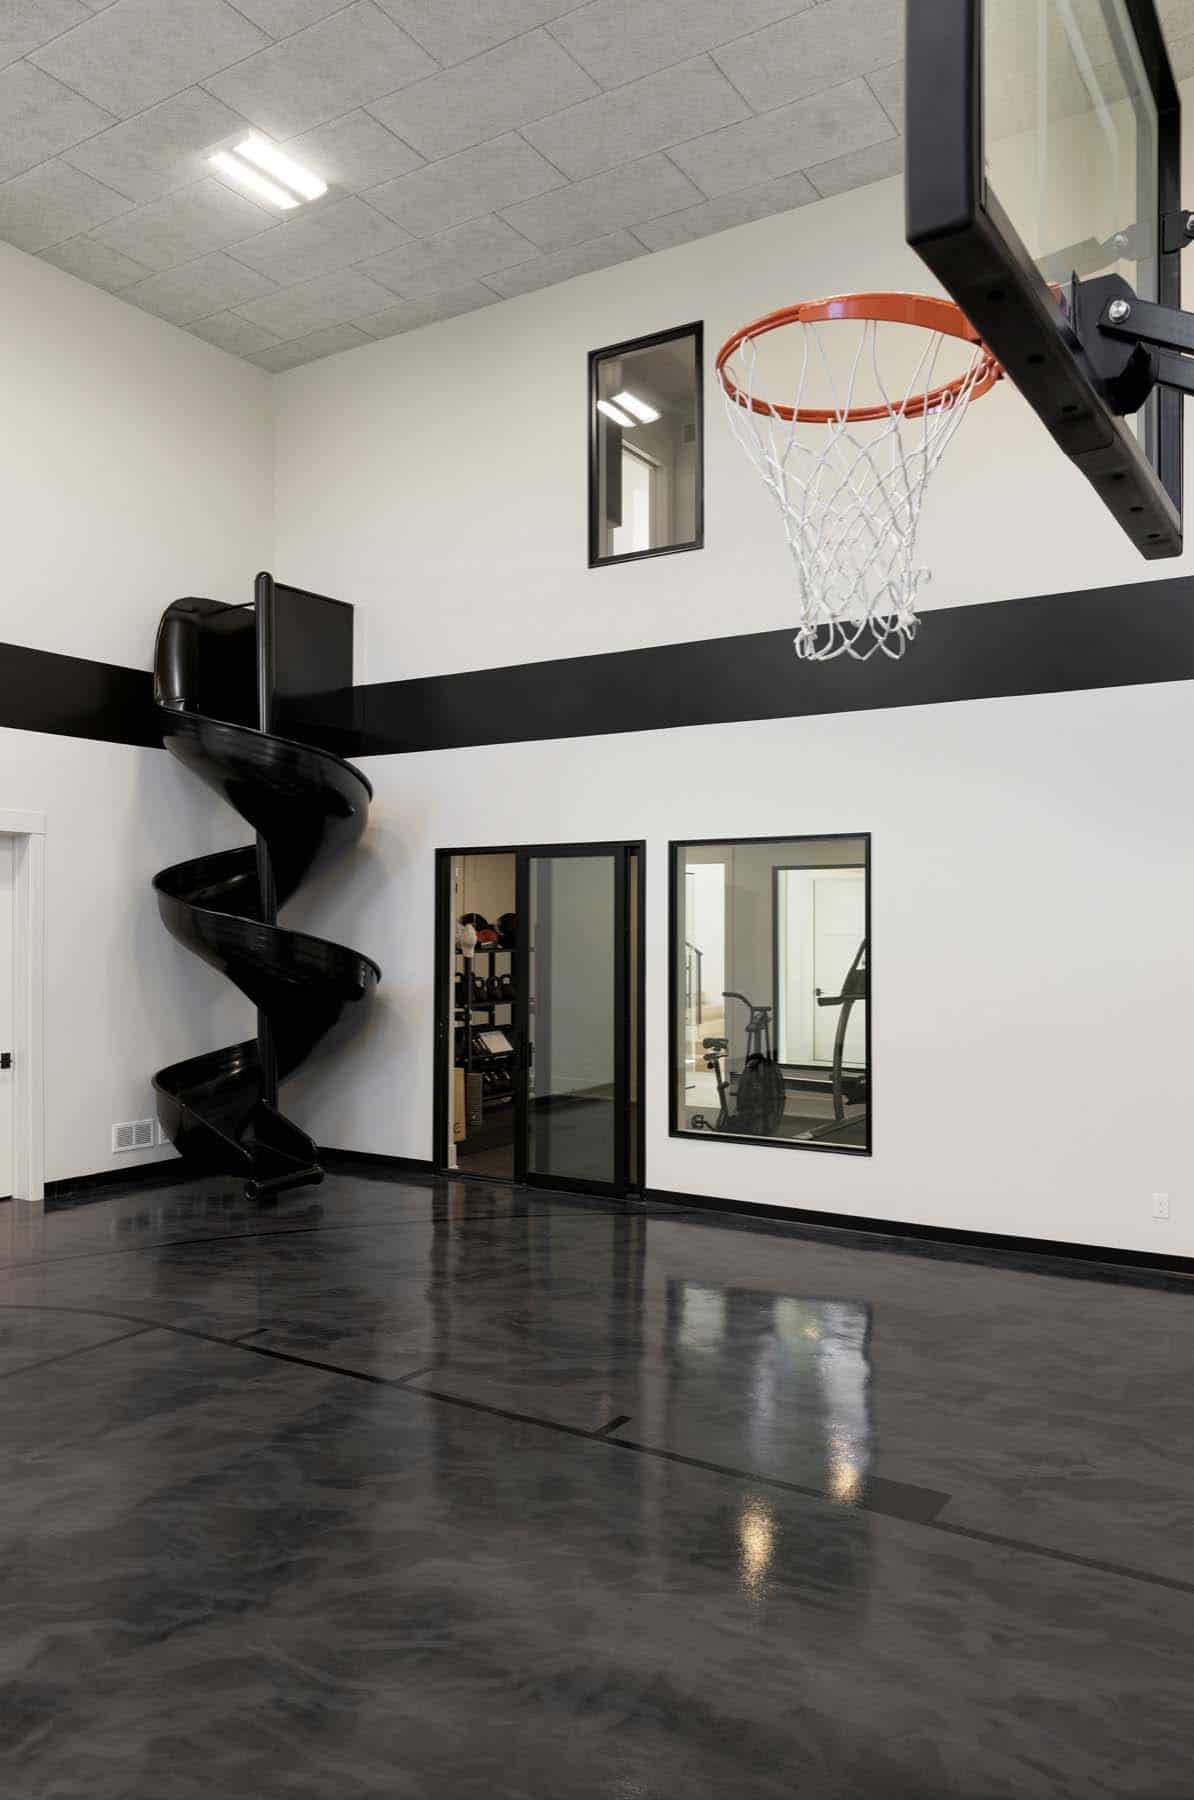 urban-lower-level-indoor-basketball-court-and-slide